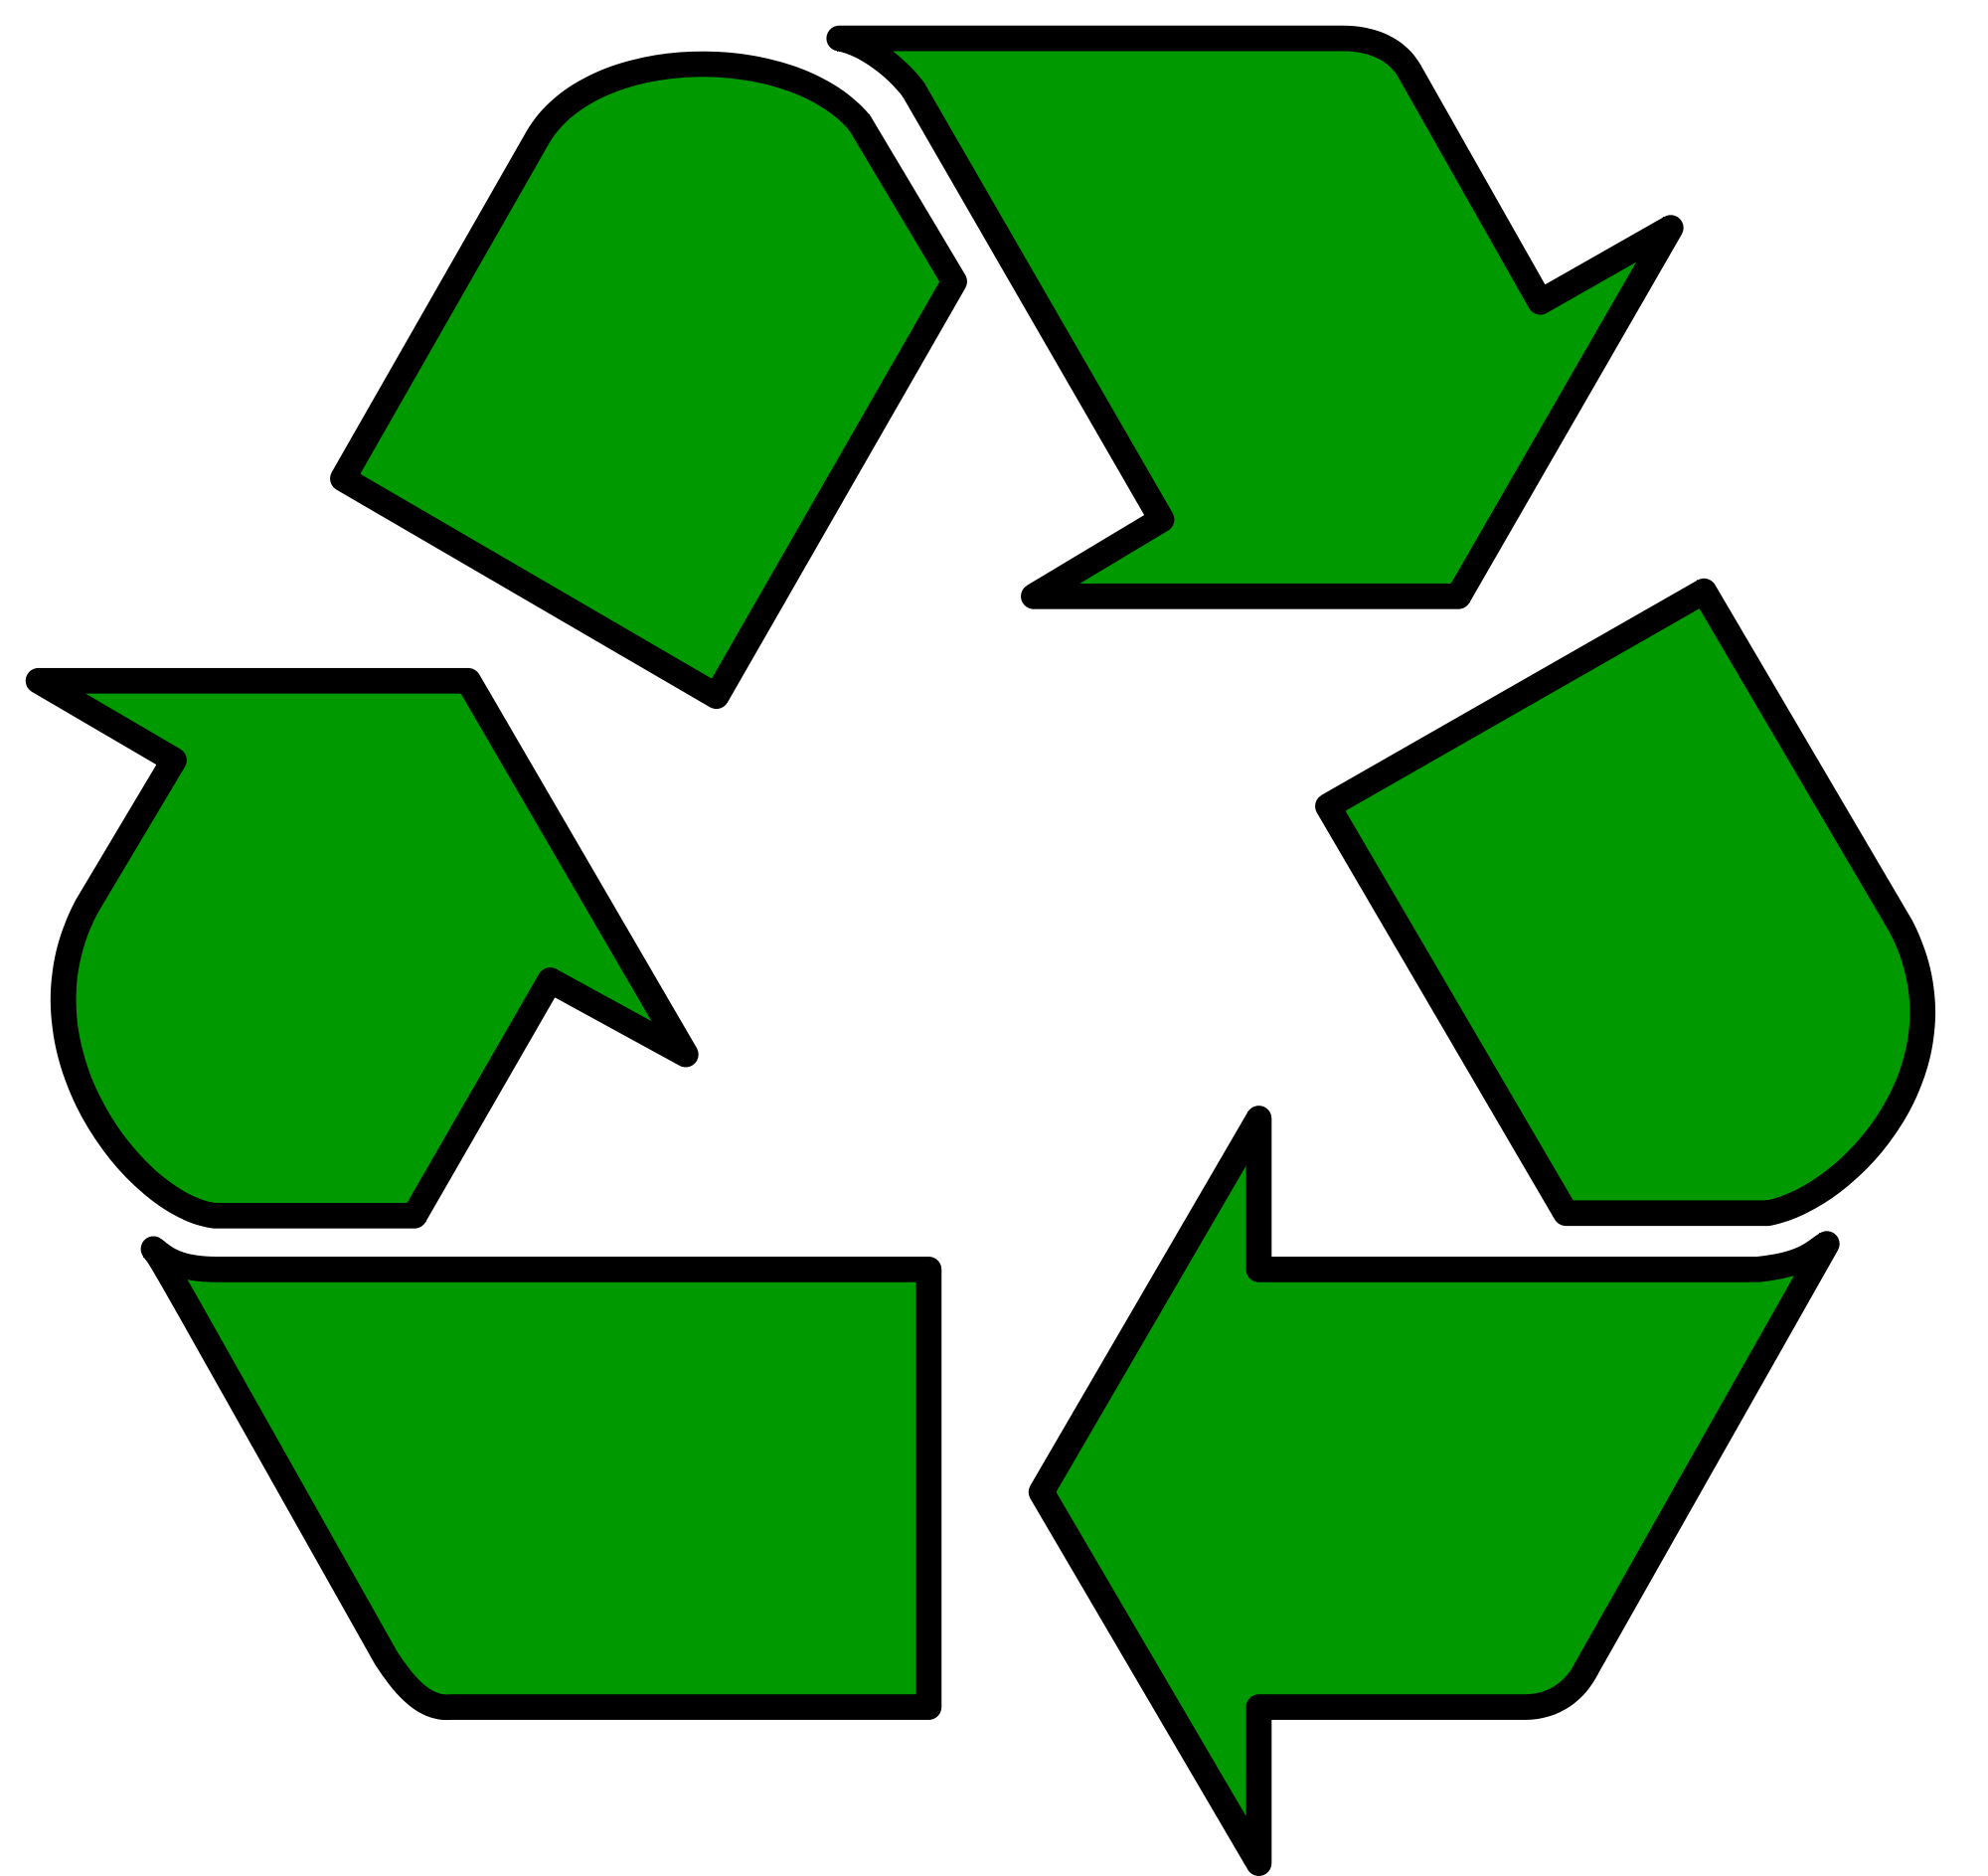 Automotive Recycling Logo - The Advantages of Recycling Cars